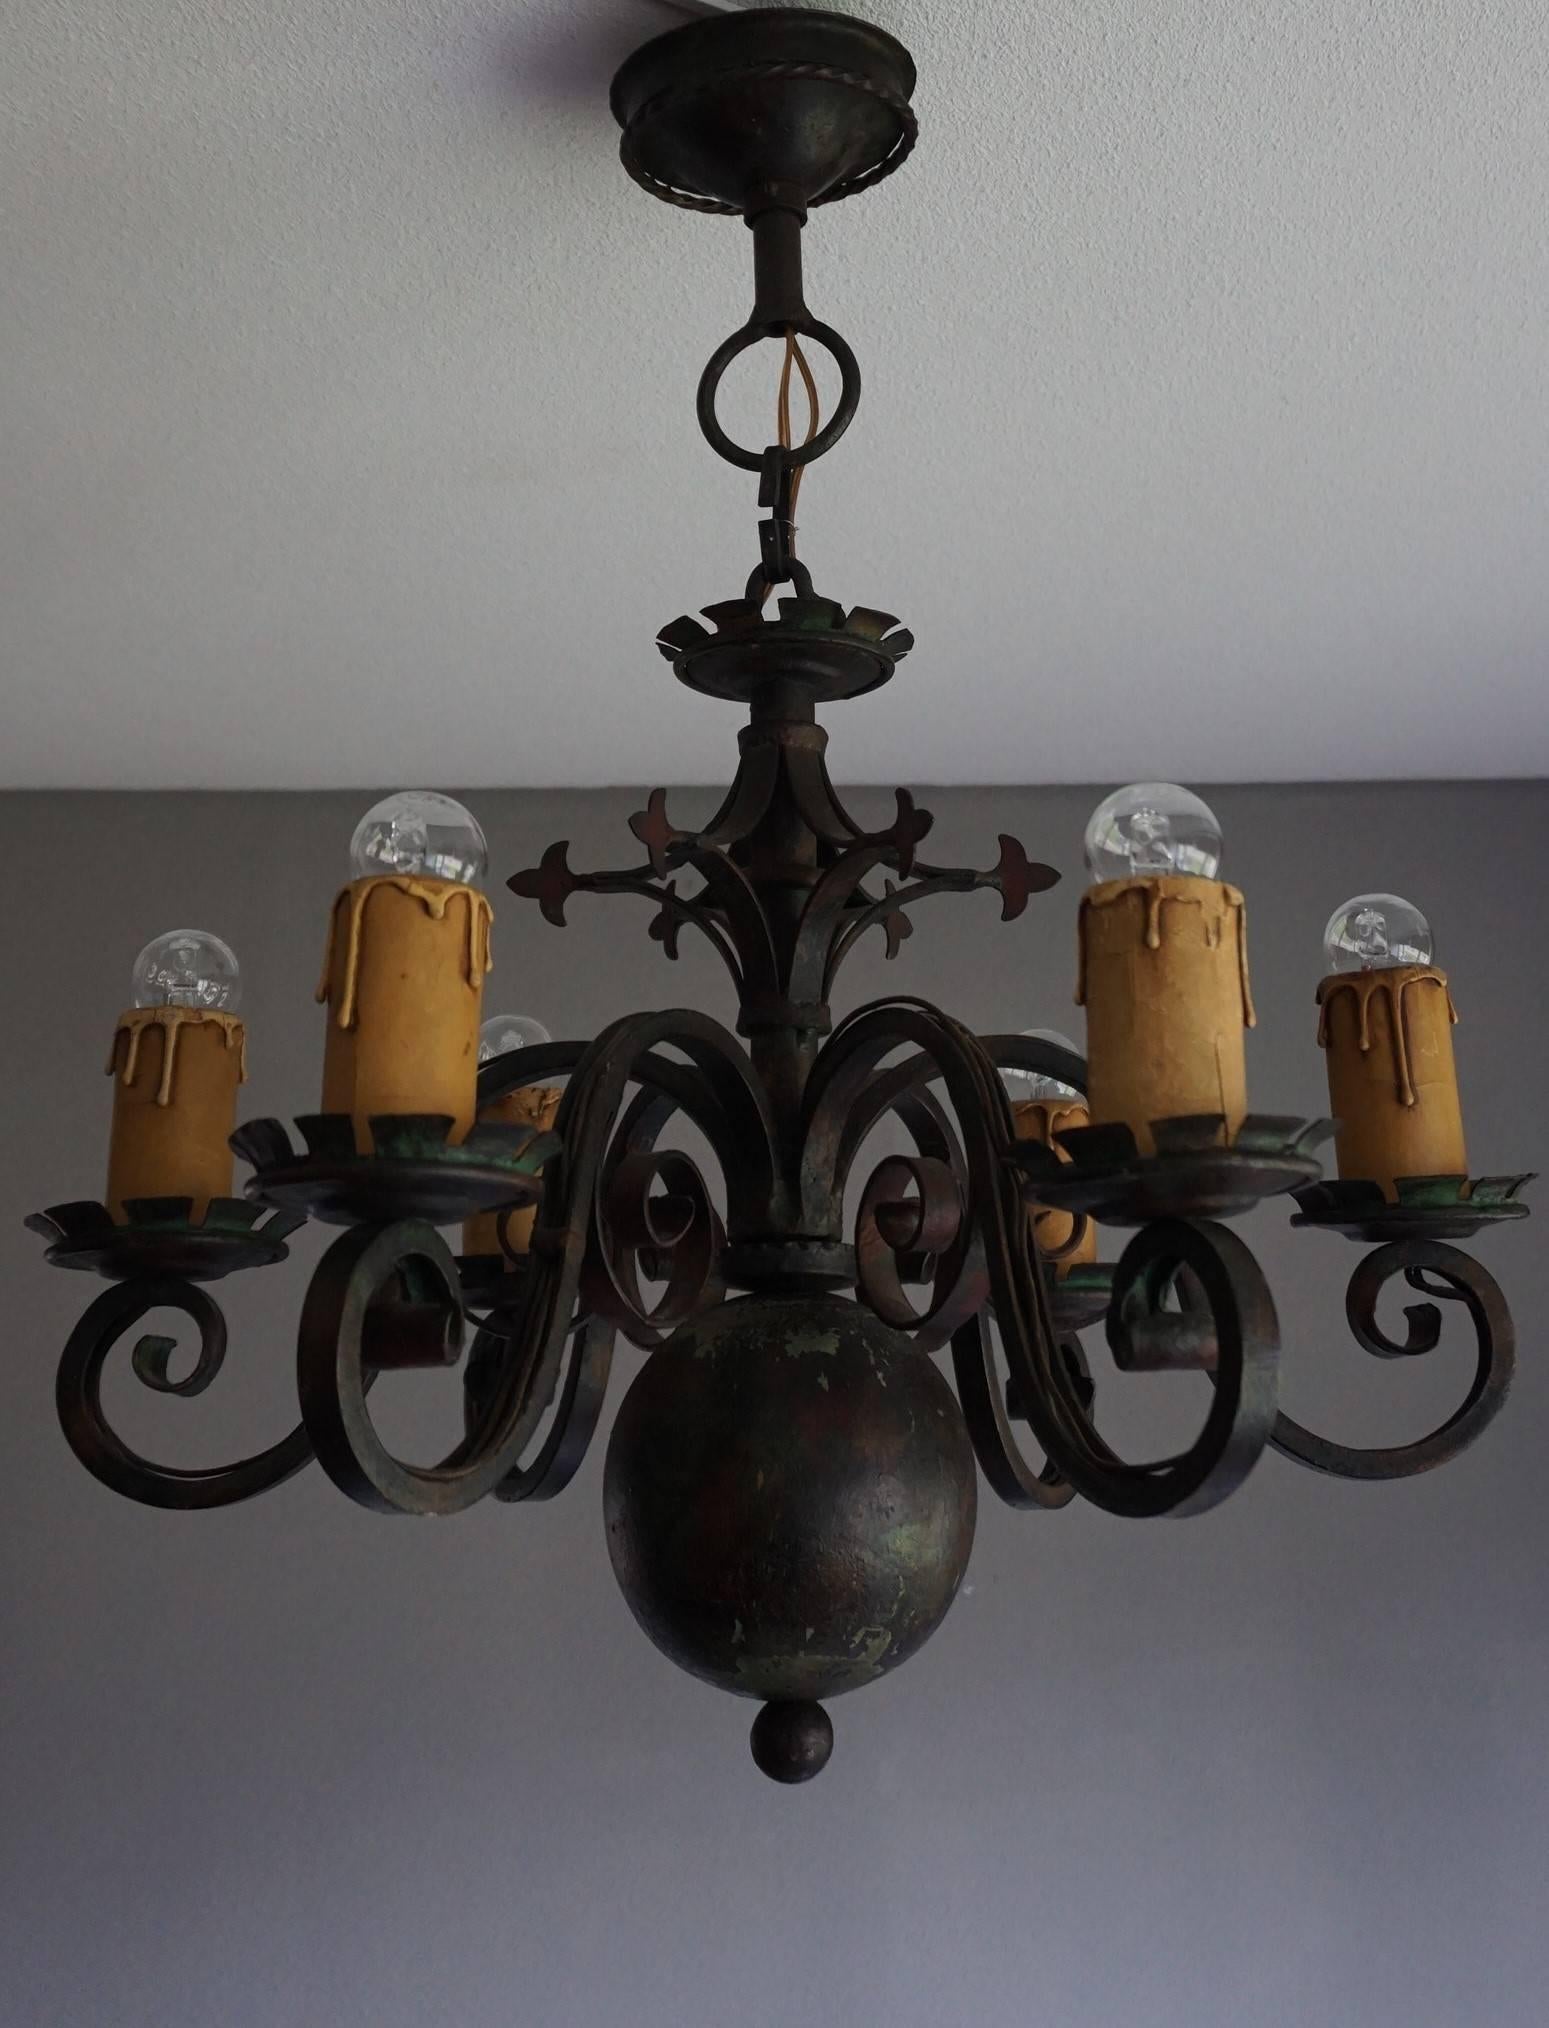 gothic revival chandelier